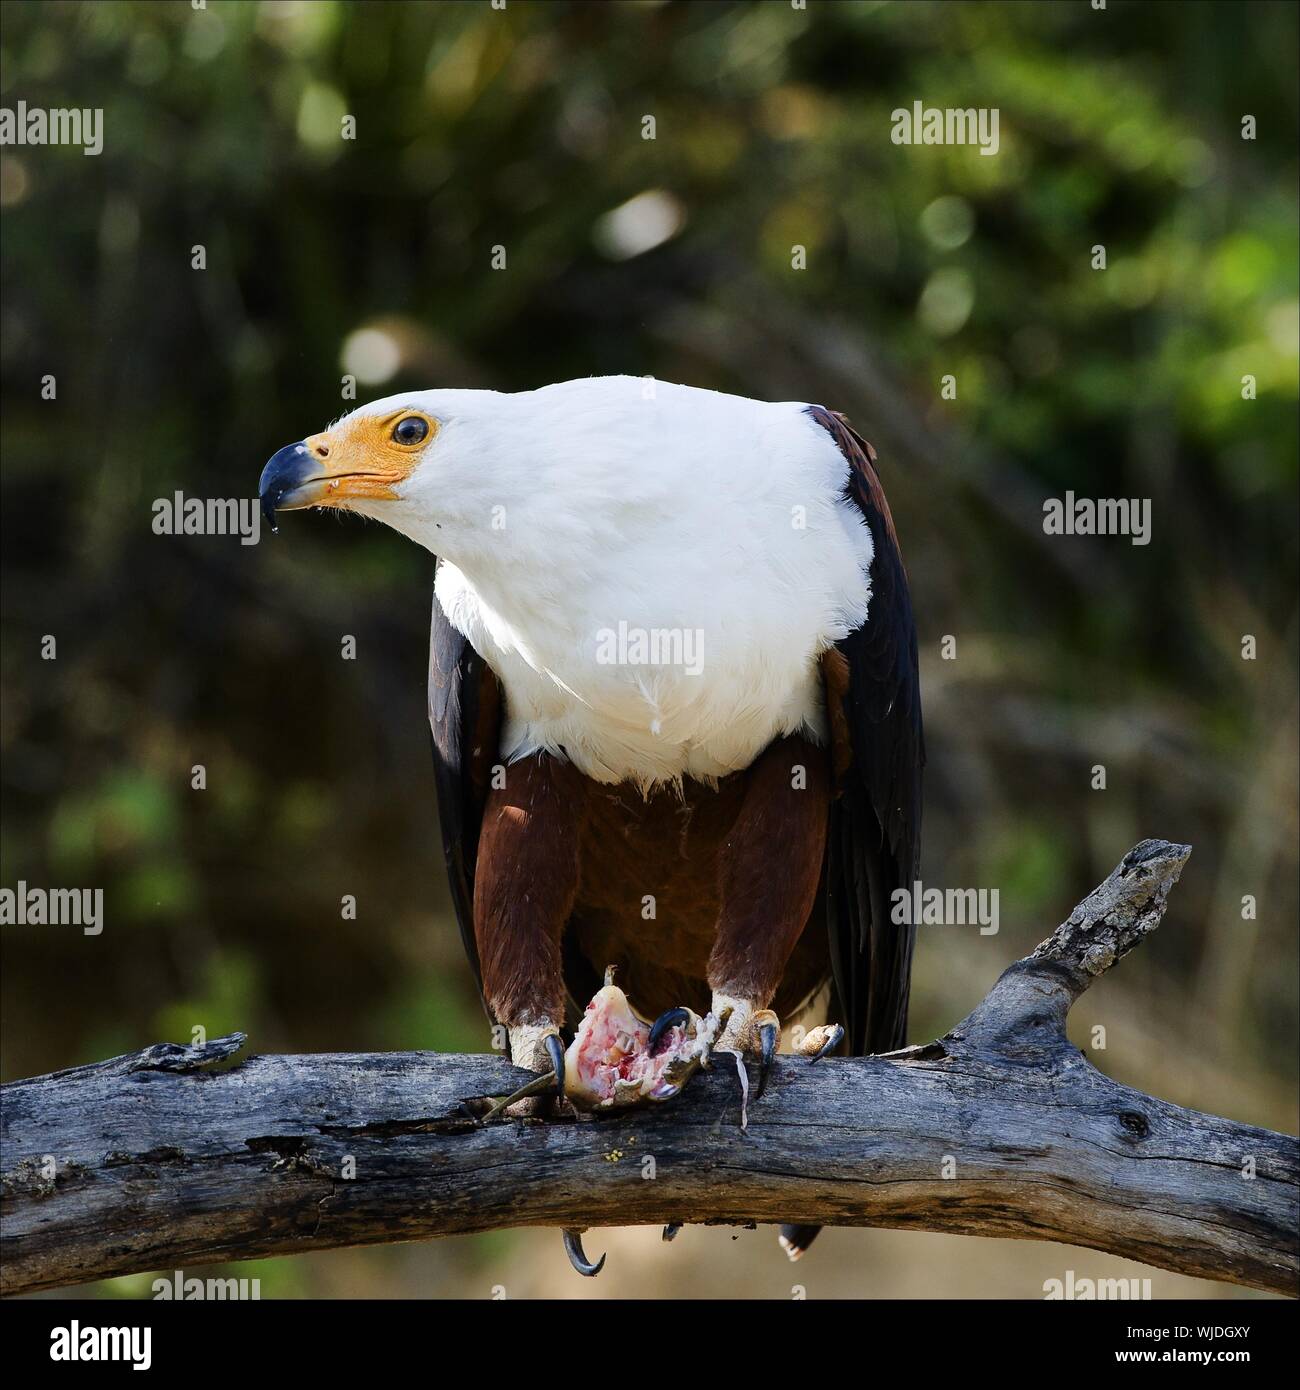 The African Fish Eagle (Haliaeetus vocifer) or–to distinguish it from the true fish eagles (Ichthyophaga), the African Sea Eagle–is a large species of Stock Photo